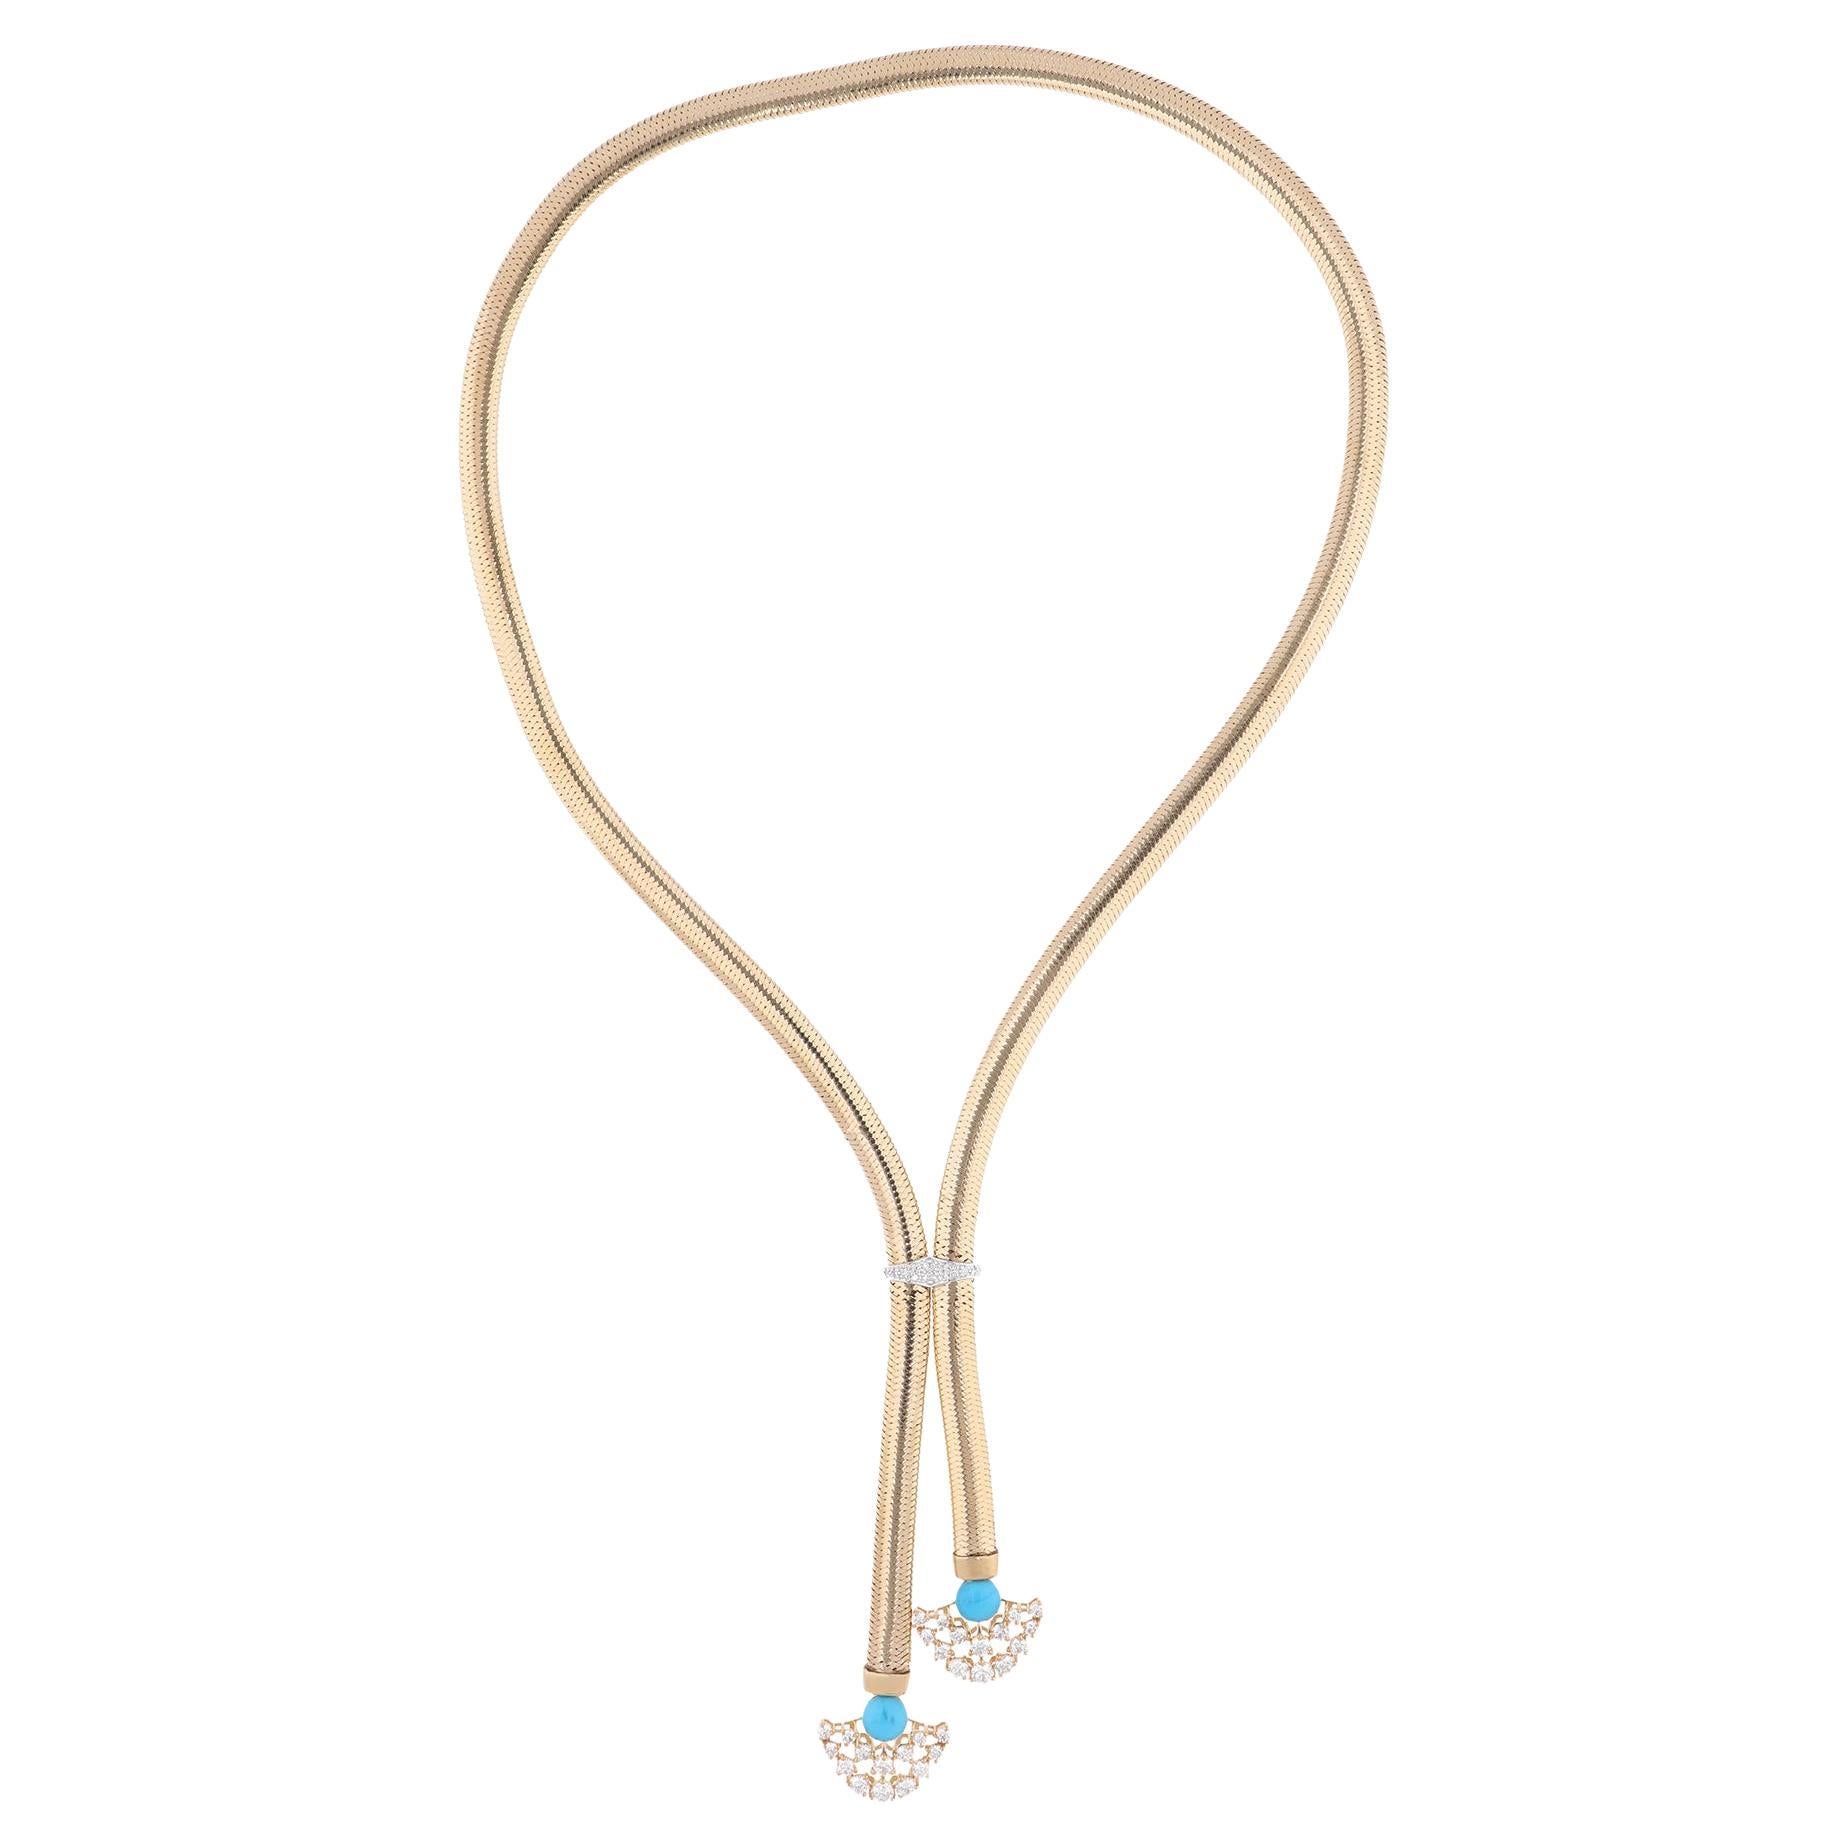 Blue Turquoise H/SI Diamond Pendant 18 Karat Yellow Gold Snake Chain Necklace For Sale